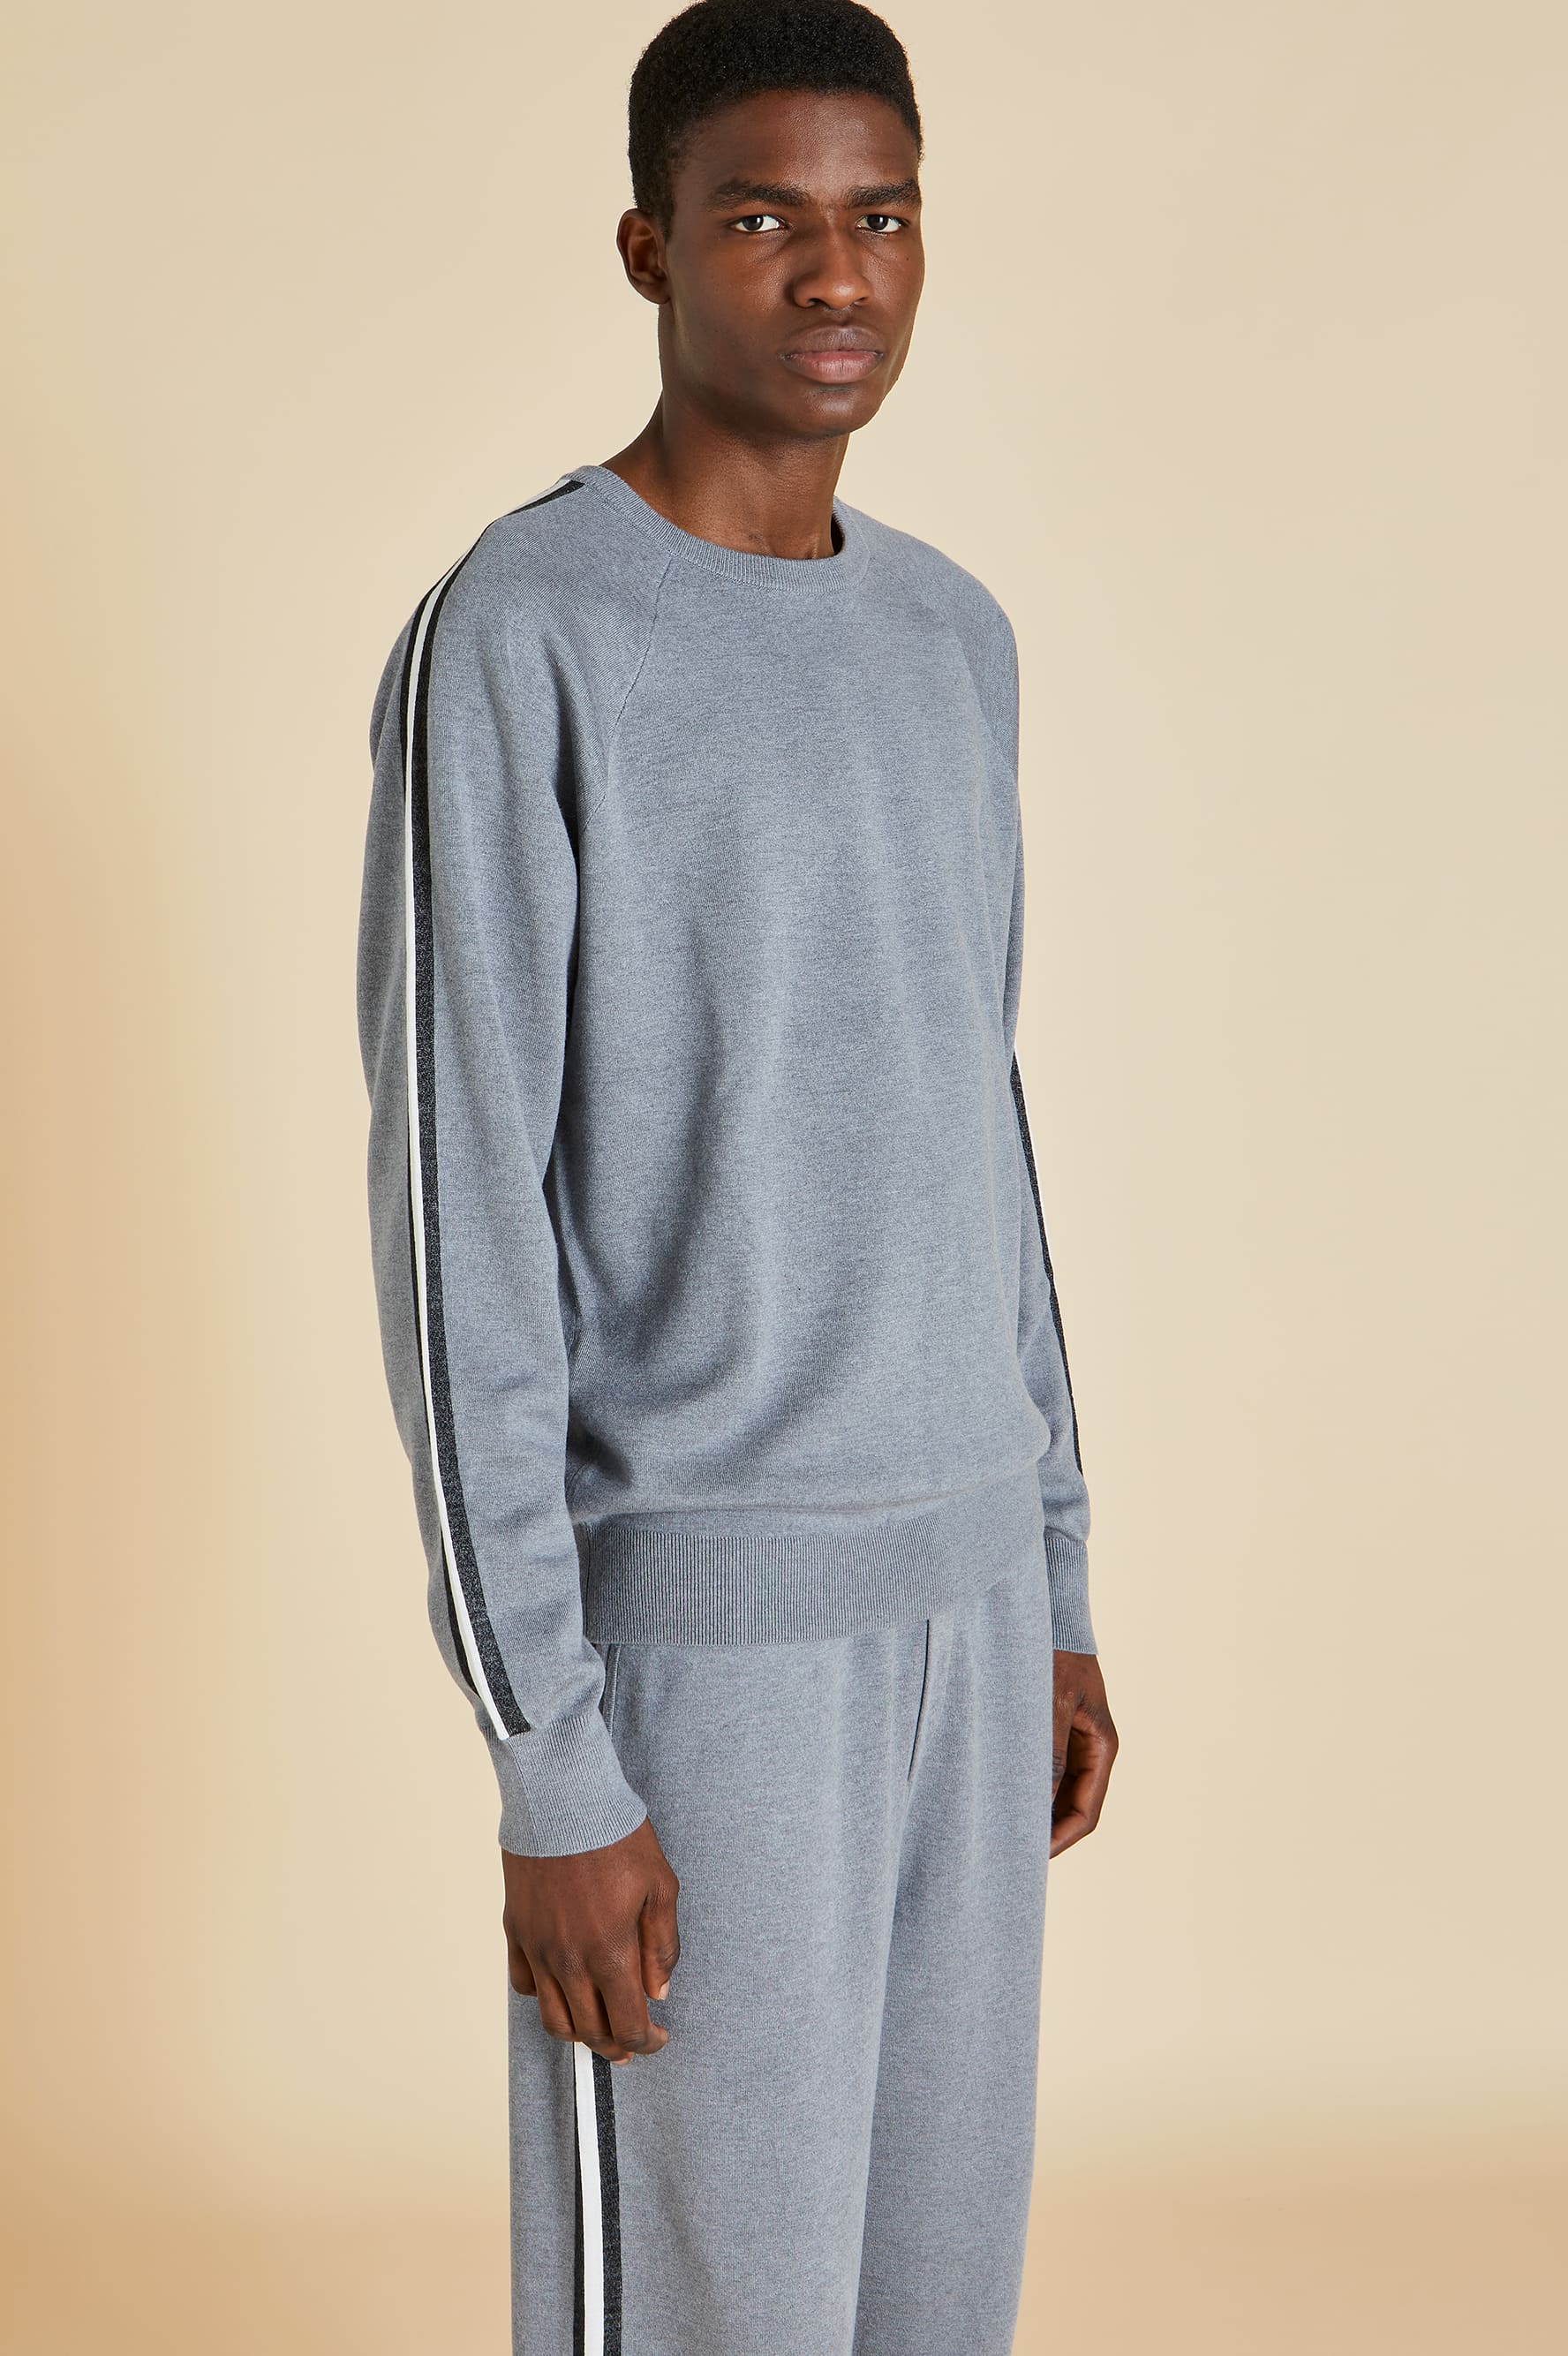 Missy London Grey Tracksuit in Silk-Cashmere